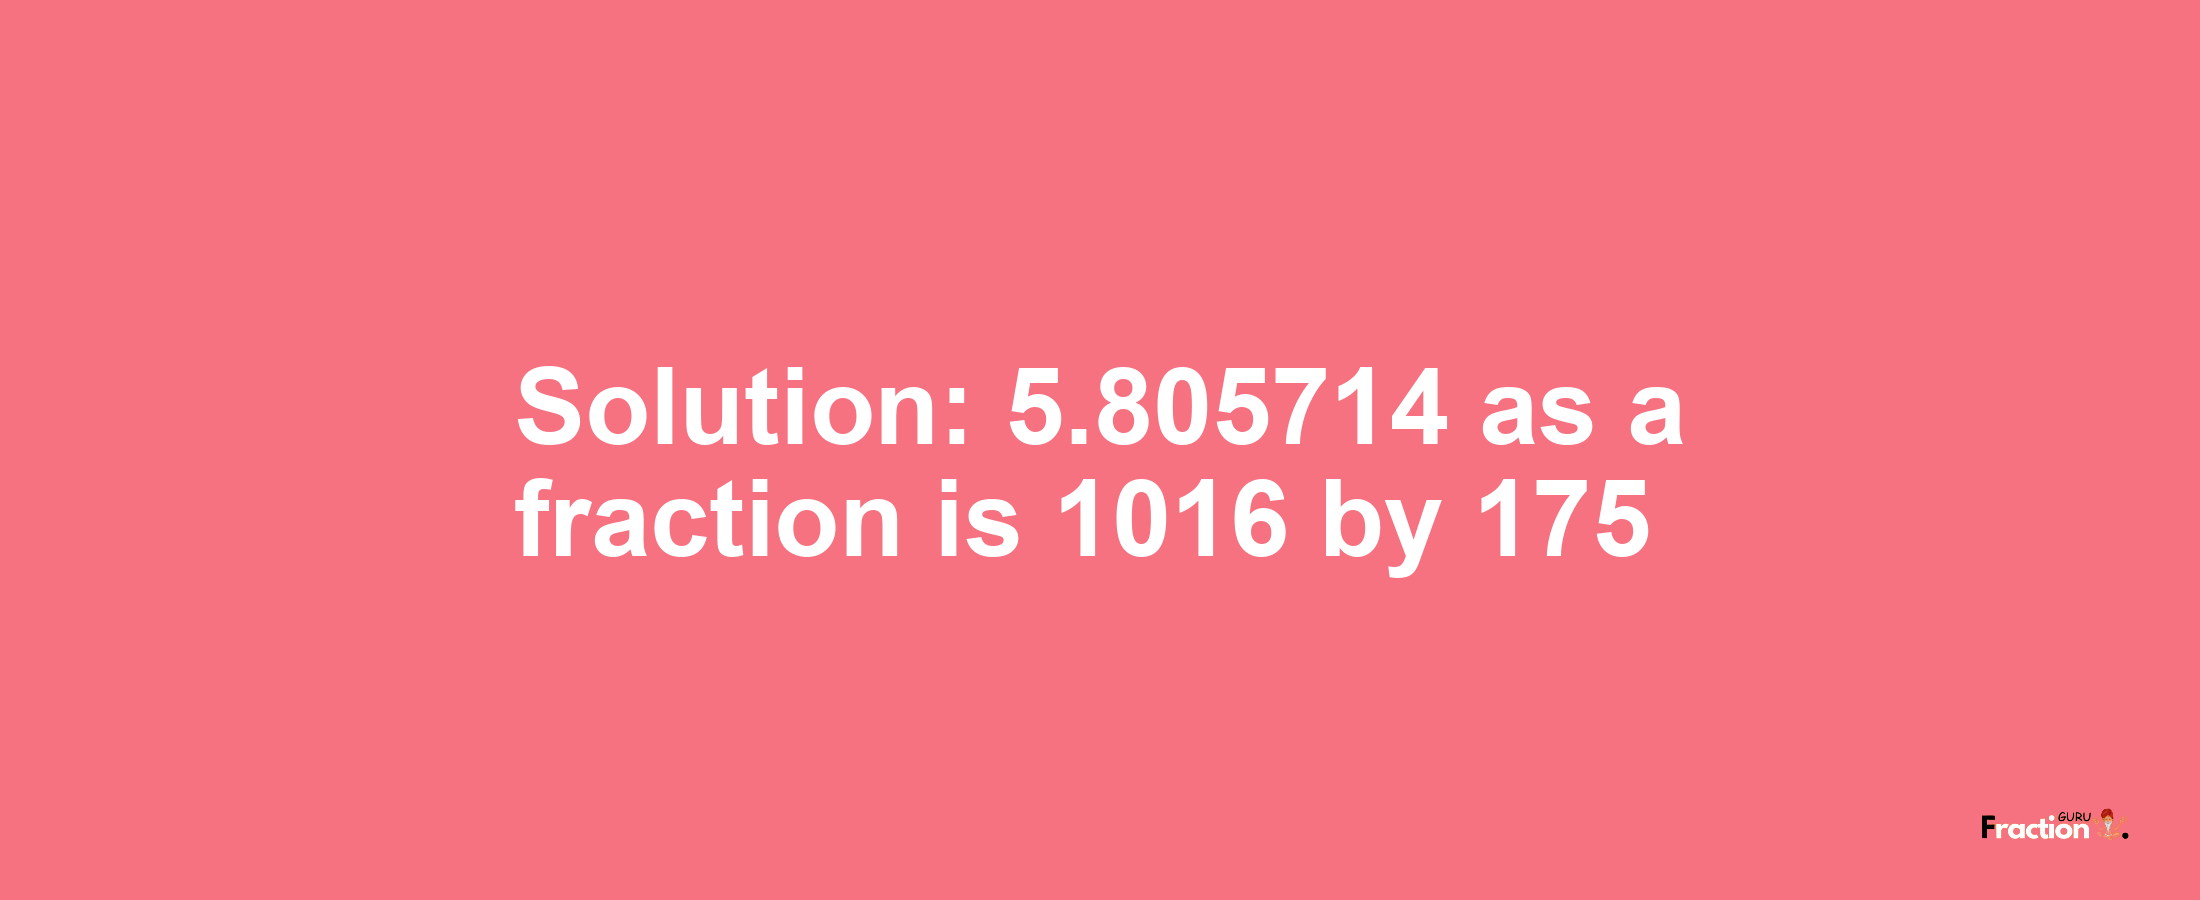 Solution:5.805714 as a fraction is 1016/175